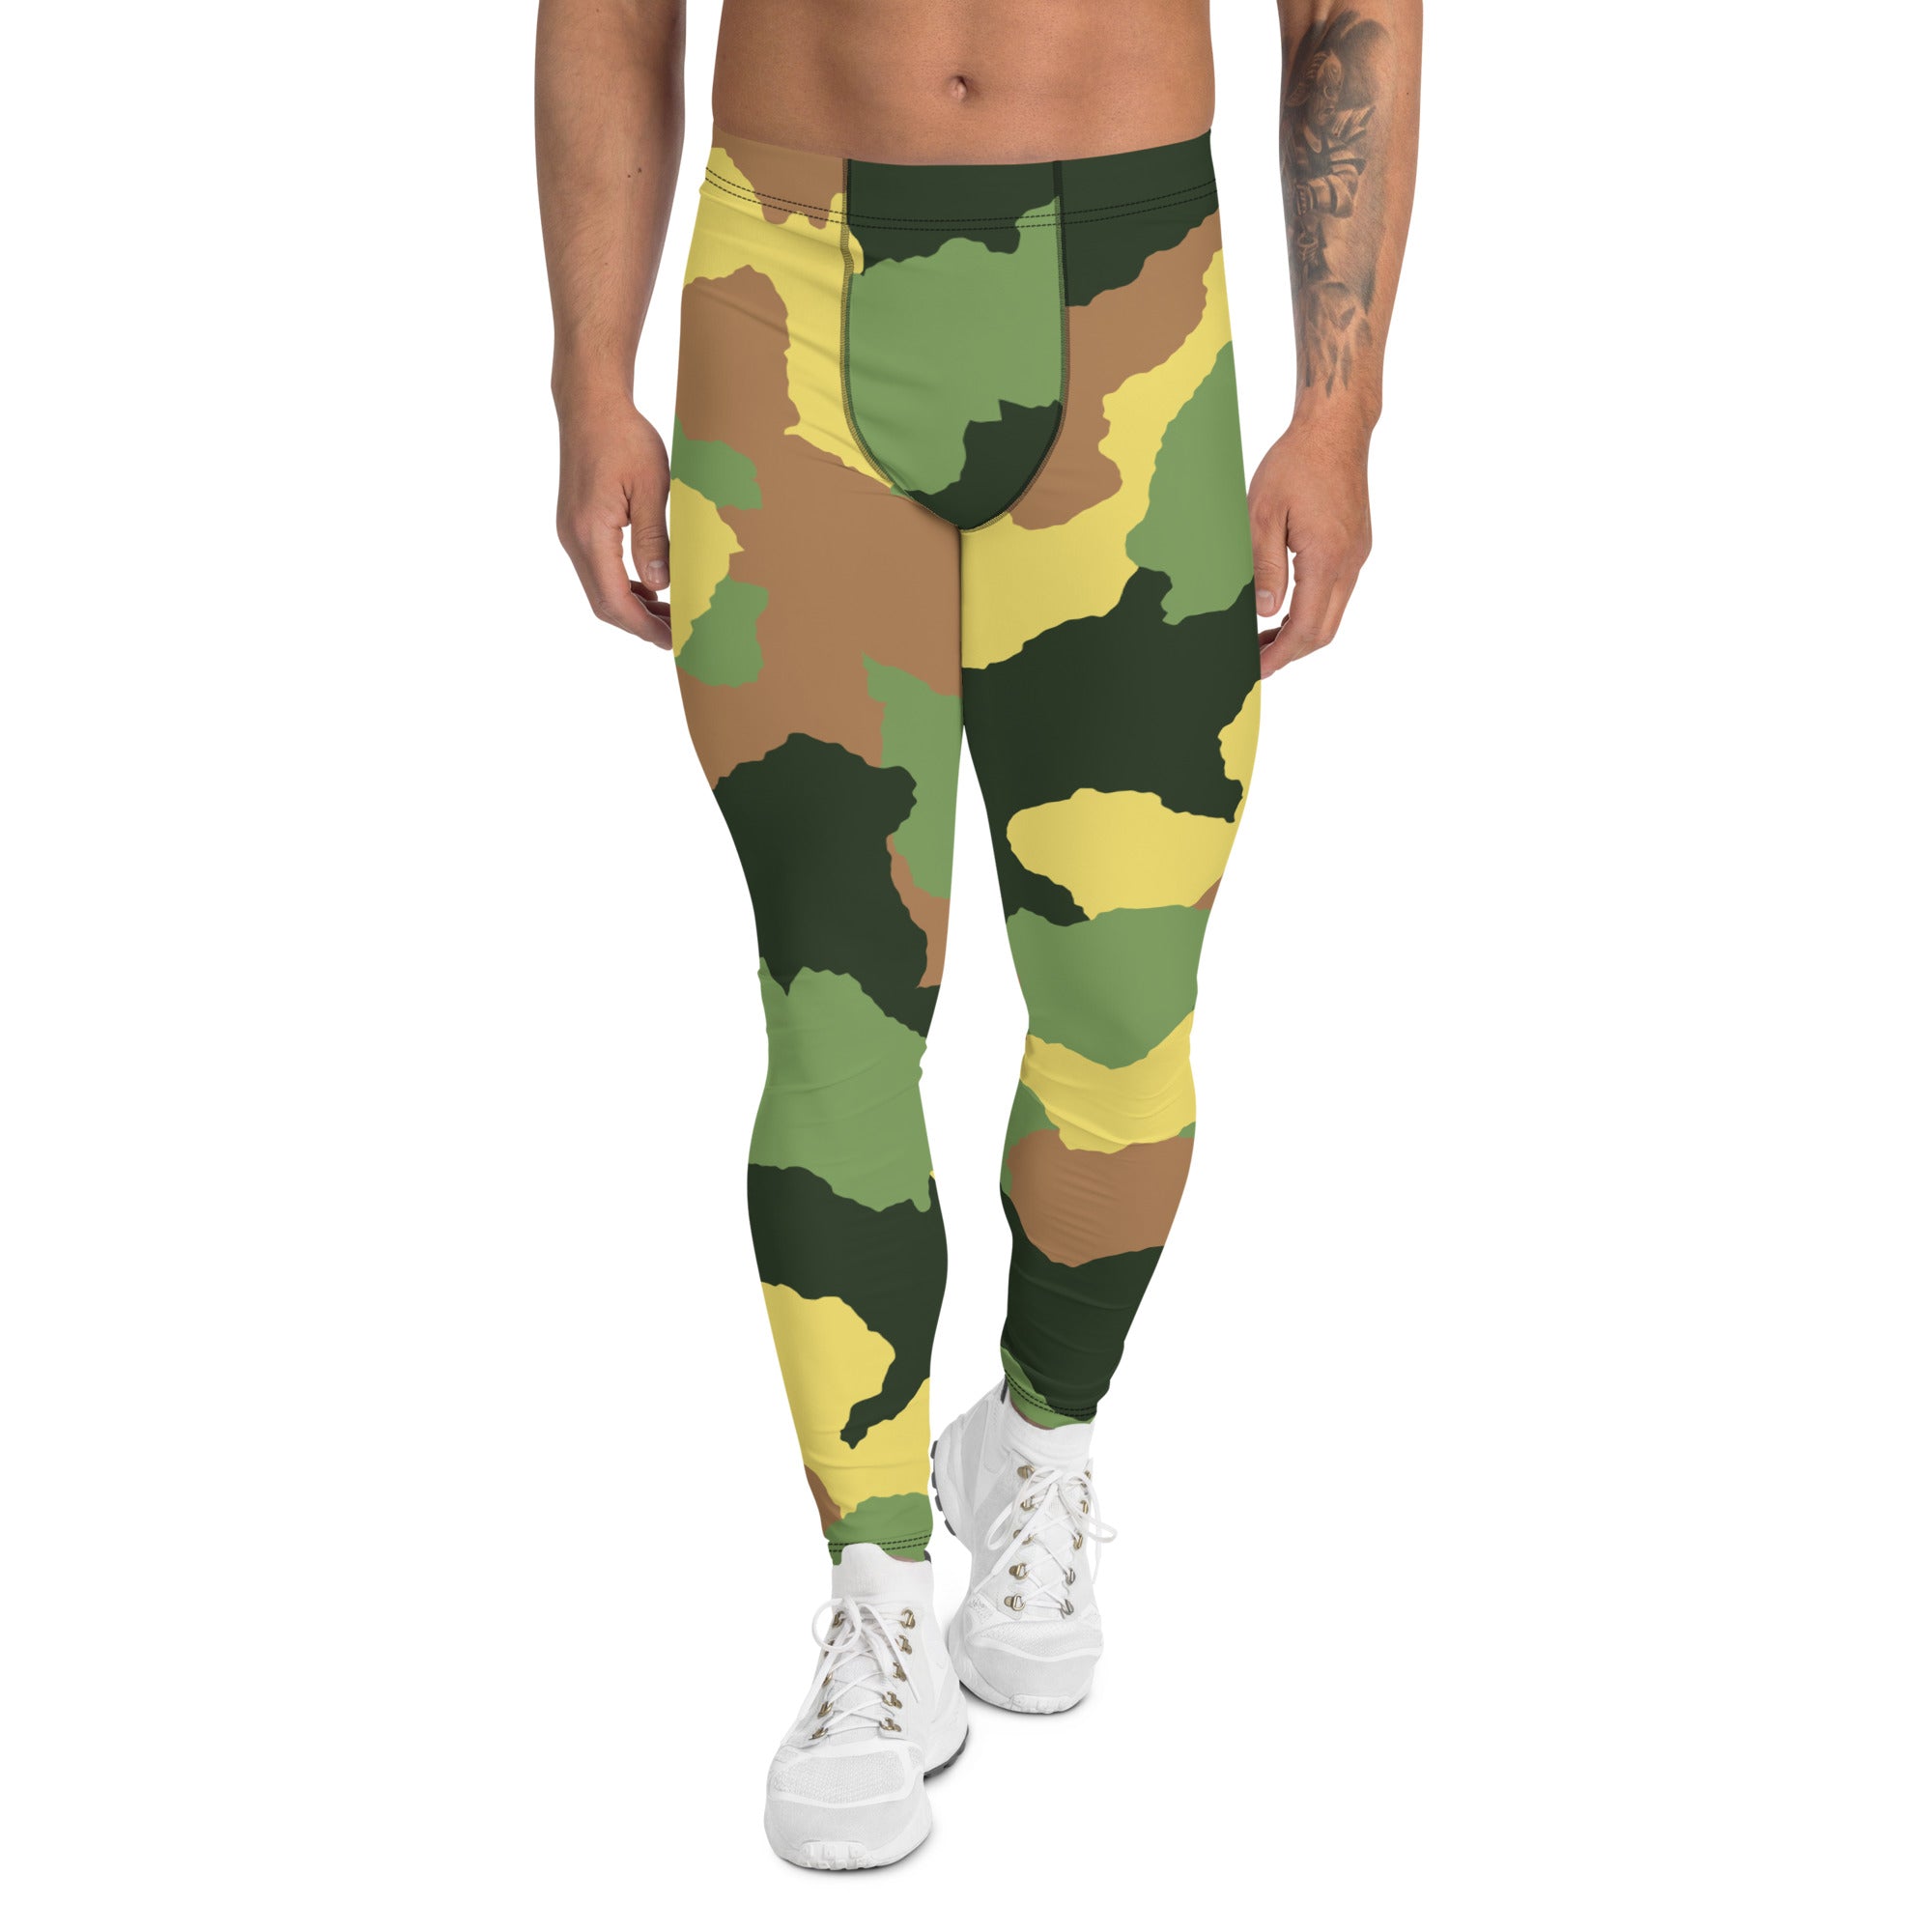 Green Camo Men's Leggings, Best Green Camouflaged Military Army Print Designer Meggings Men's Workout Gym Tights Leggings, Men's Compression Tights Pants - Made in USA/ EU/ MX (US Size: XS-3XL) 